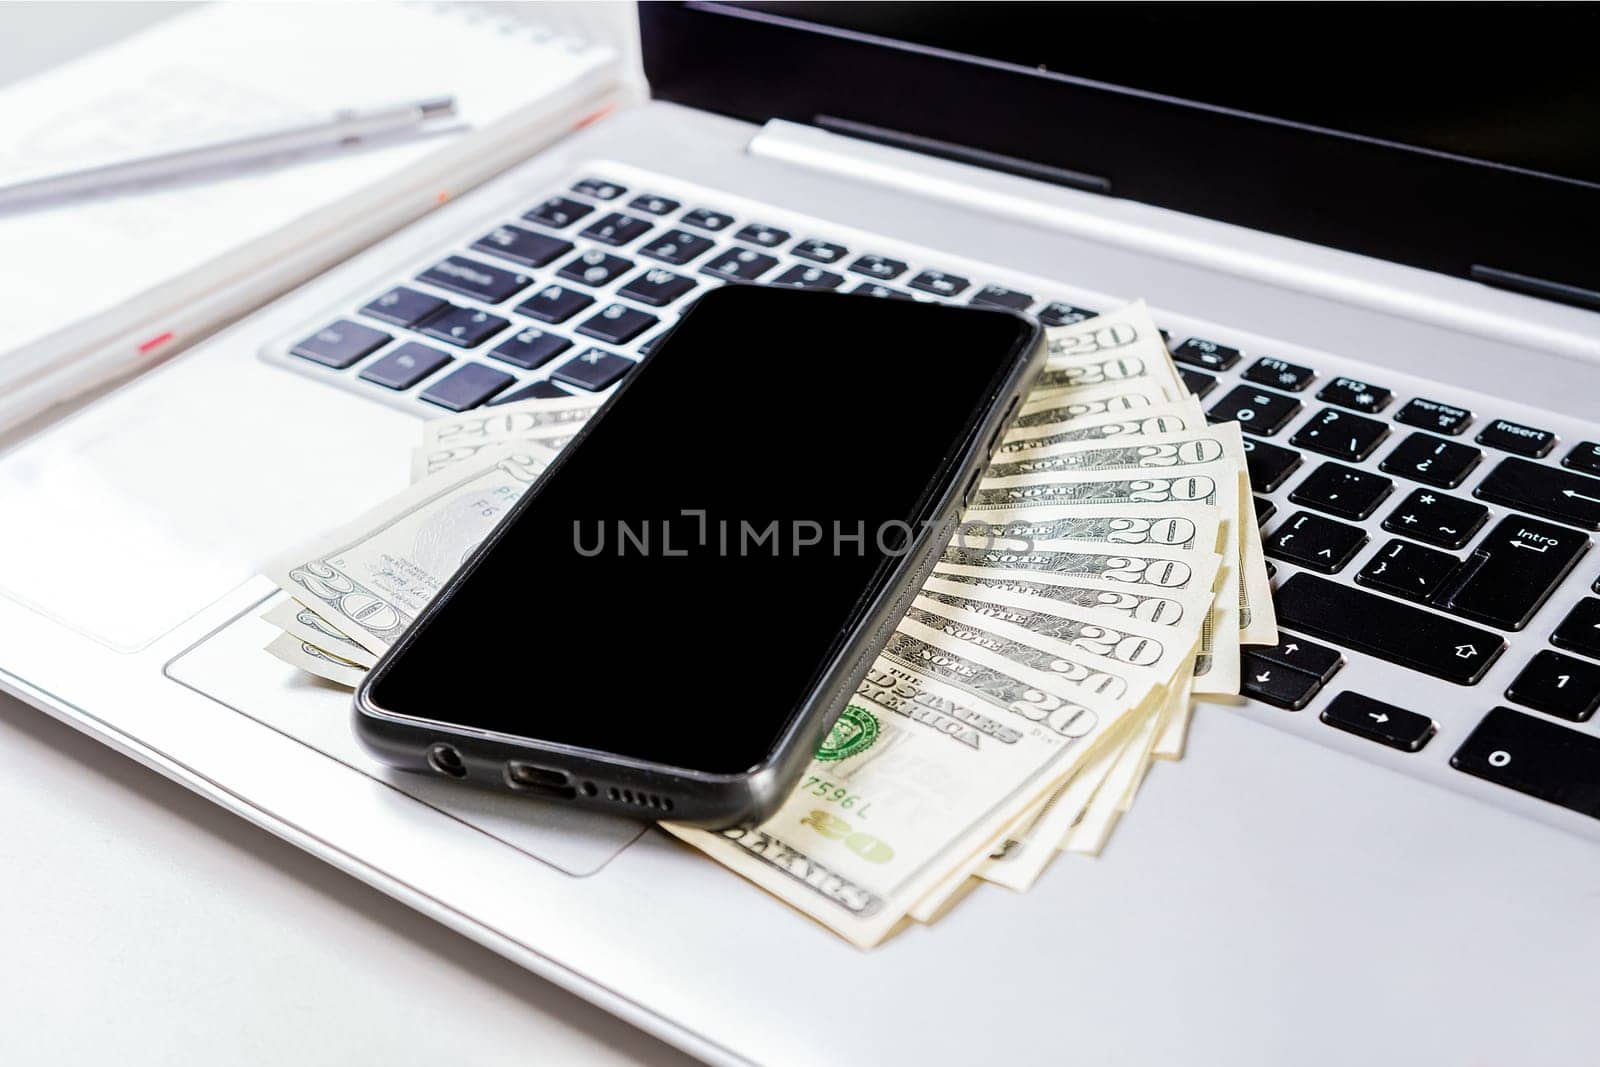 Cell phone on laptop keyboard and dollar bills. Mobile phone on top of dollar bills on laptop keyboard. Top view of laptop with cell phone and dollar bills by isaiphoto